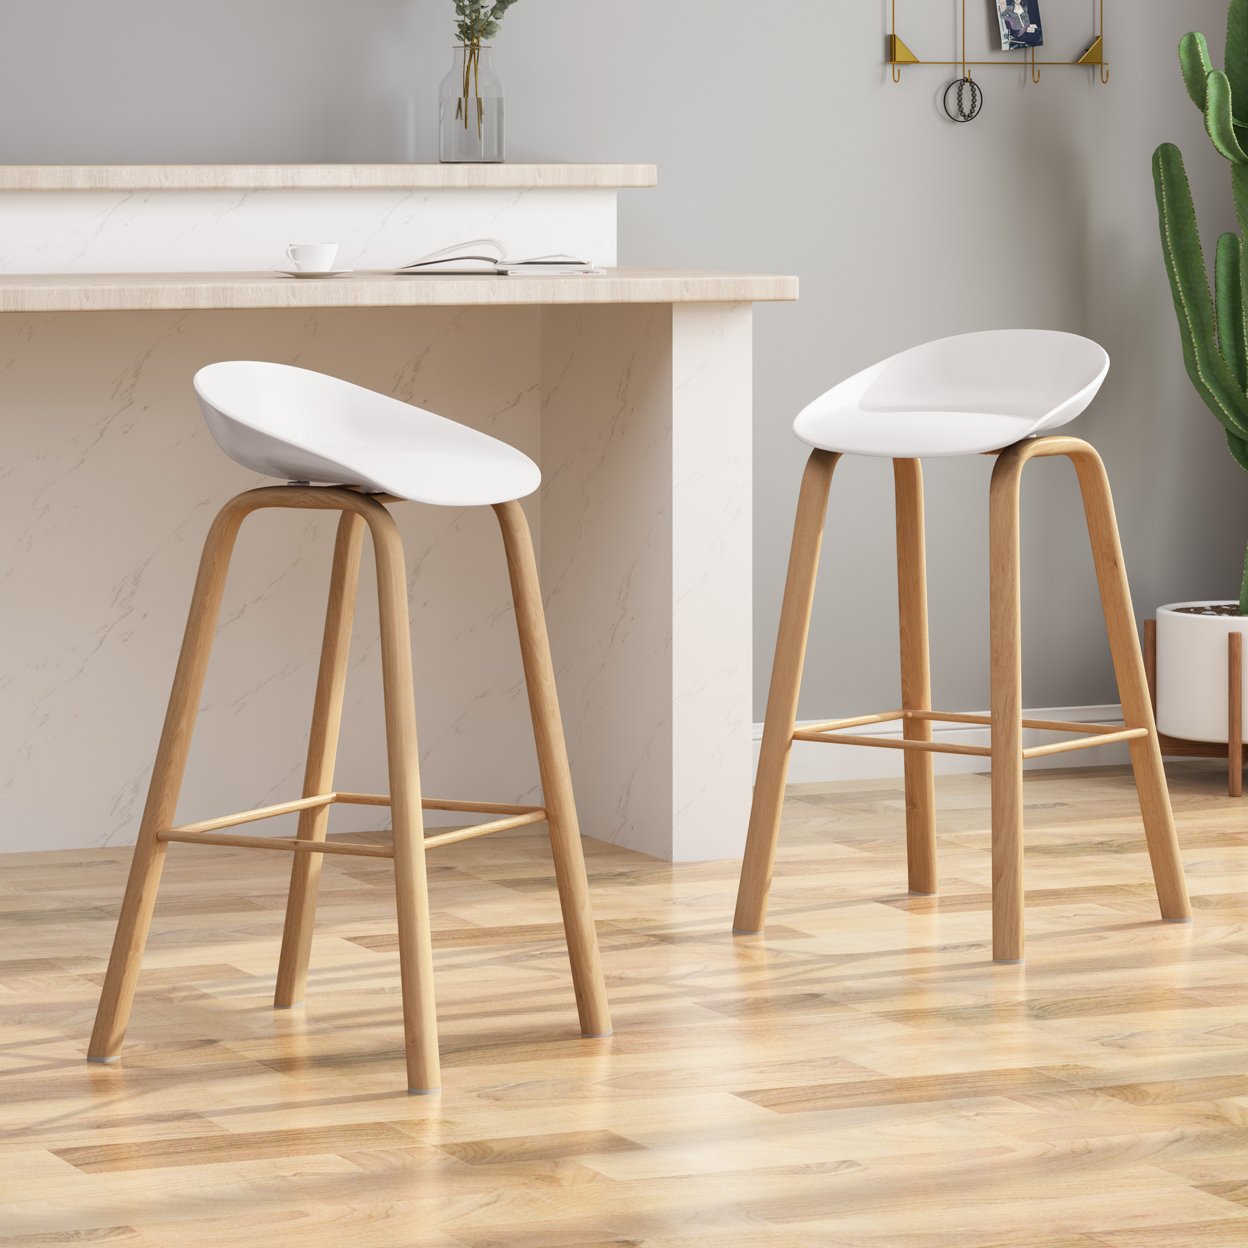 Morgan 30 Modern Barstool With Iron Legs (Set Of 2) - White + Natural Wood Finish